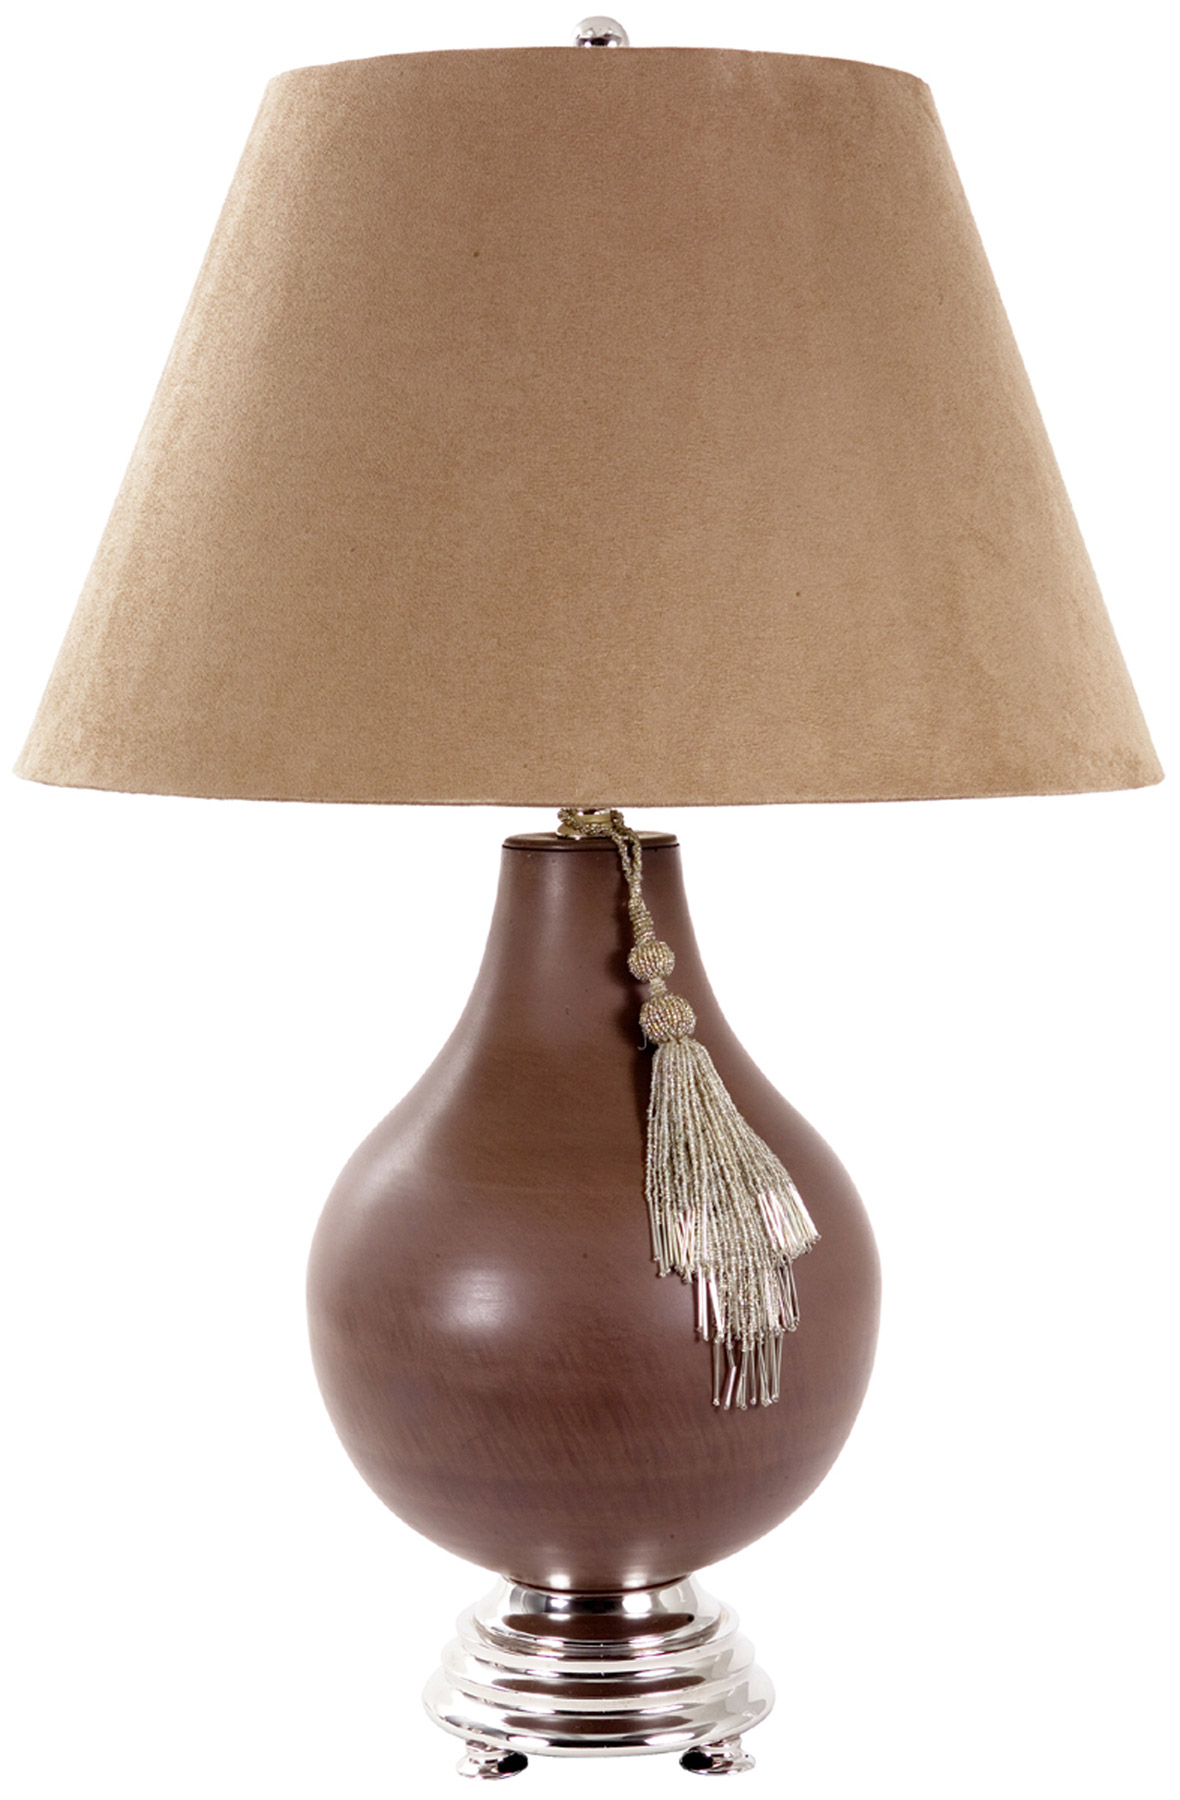 Lamps table lamps standard table lamps frederick cooper 65236